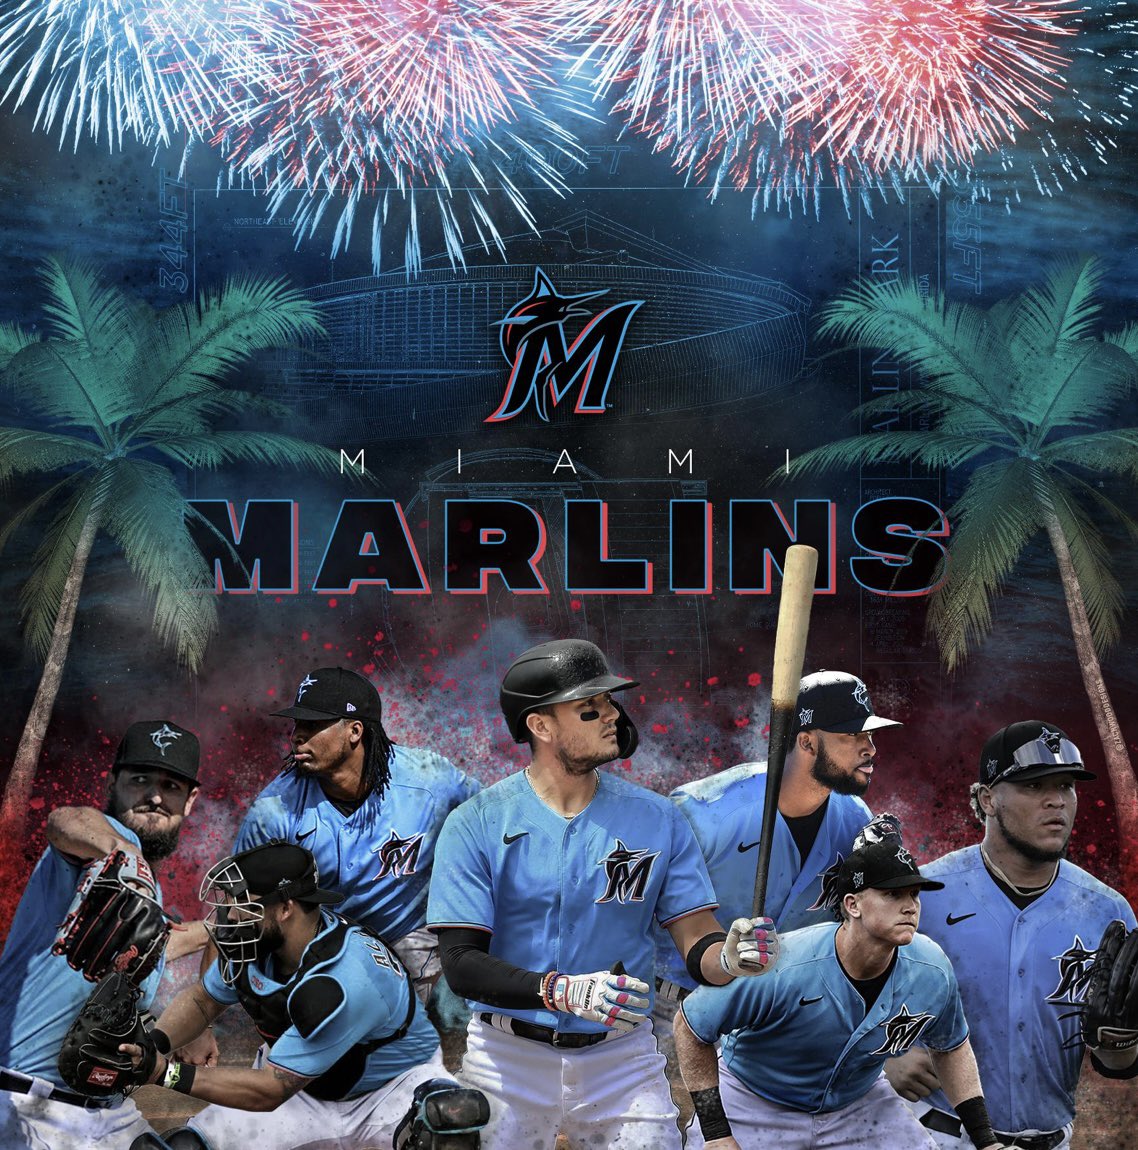 MLB POTD
6/22 ⚾️🚨

Sending 15$ to someone who Likes/RTs and tells me why they can use the money 

Miami Marlins ML -120

#PrizePicks #PrizePicksMLB 
#GamblingTwitter 
#PropBets #NBATwitter                            
#PlayerProps #DFS #fliff #Giveaways #MLBPOTD #GamblingLocks